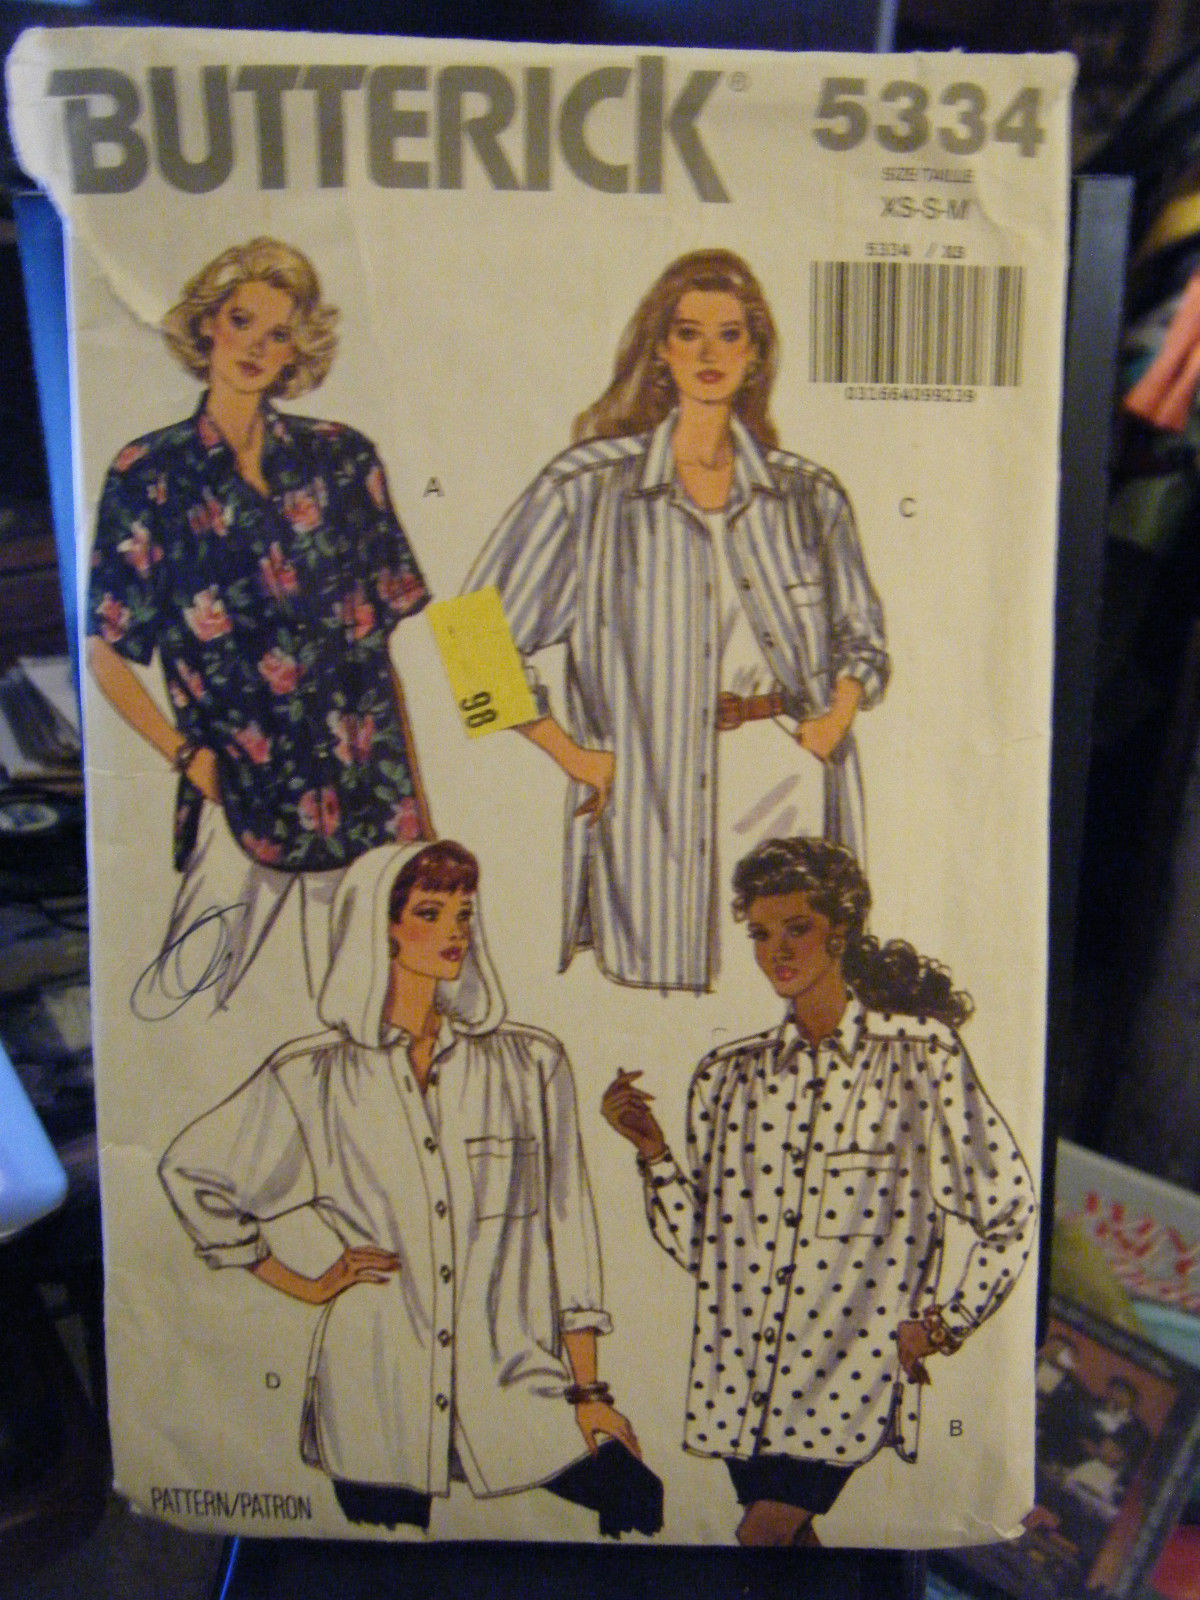 Primary image for Vintage Butterick 5334 Misses Shirts Pattern - Sizes XS & S (6-10)